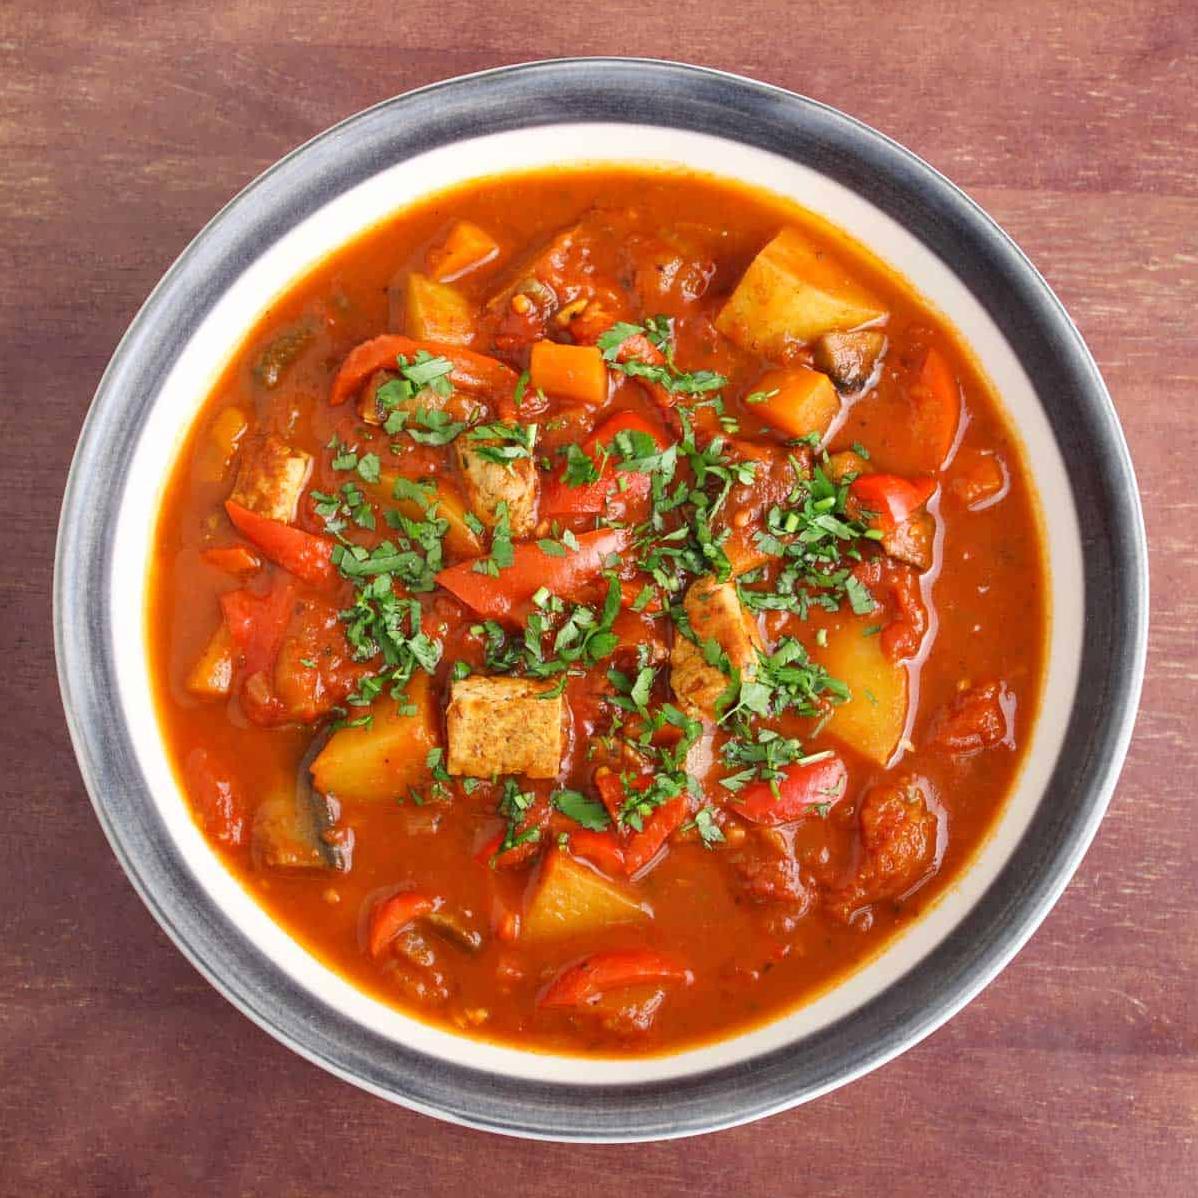  Get ready for a cozy night in with this delicious vegetarian goulash.